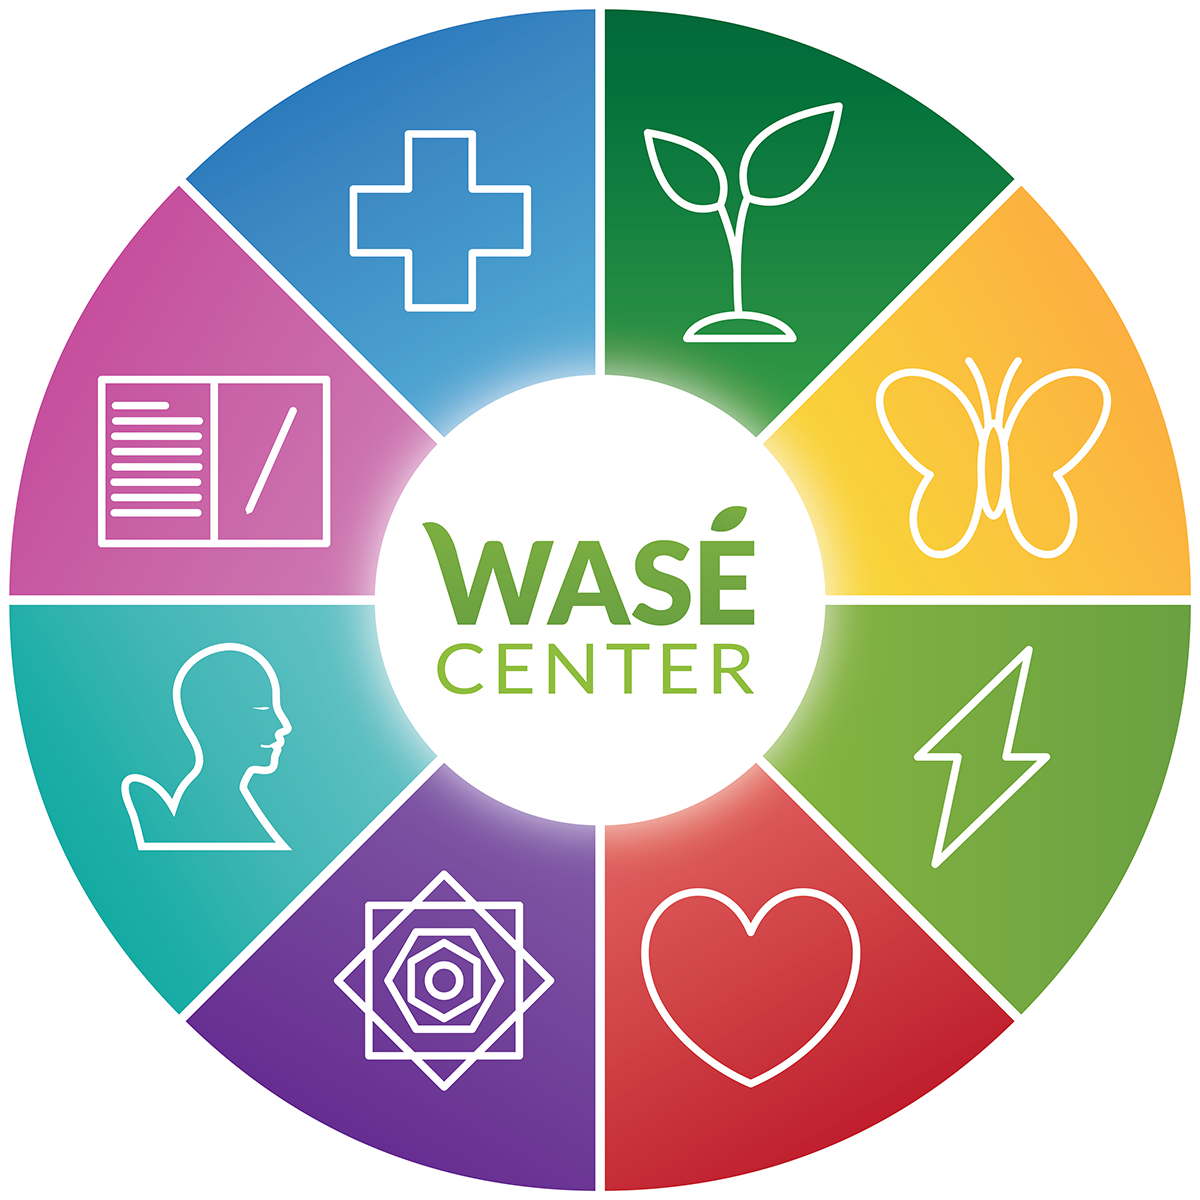 WASE Center Services Wheel Graphic